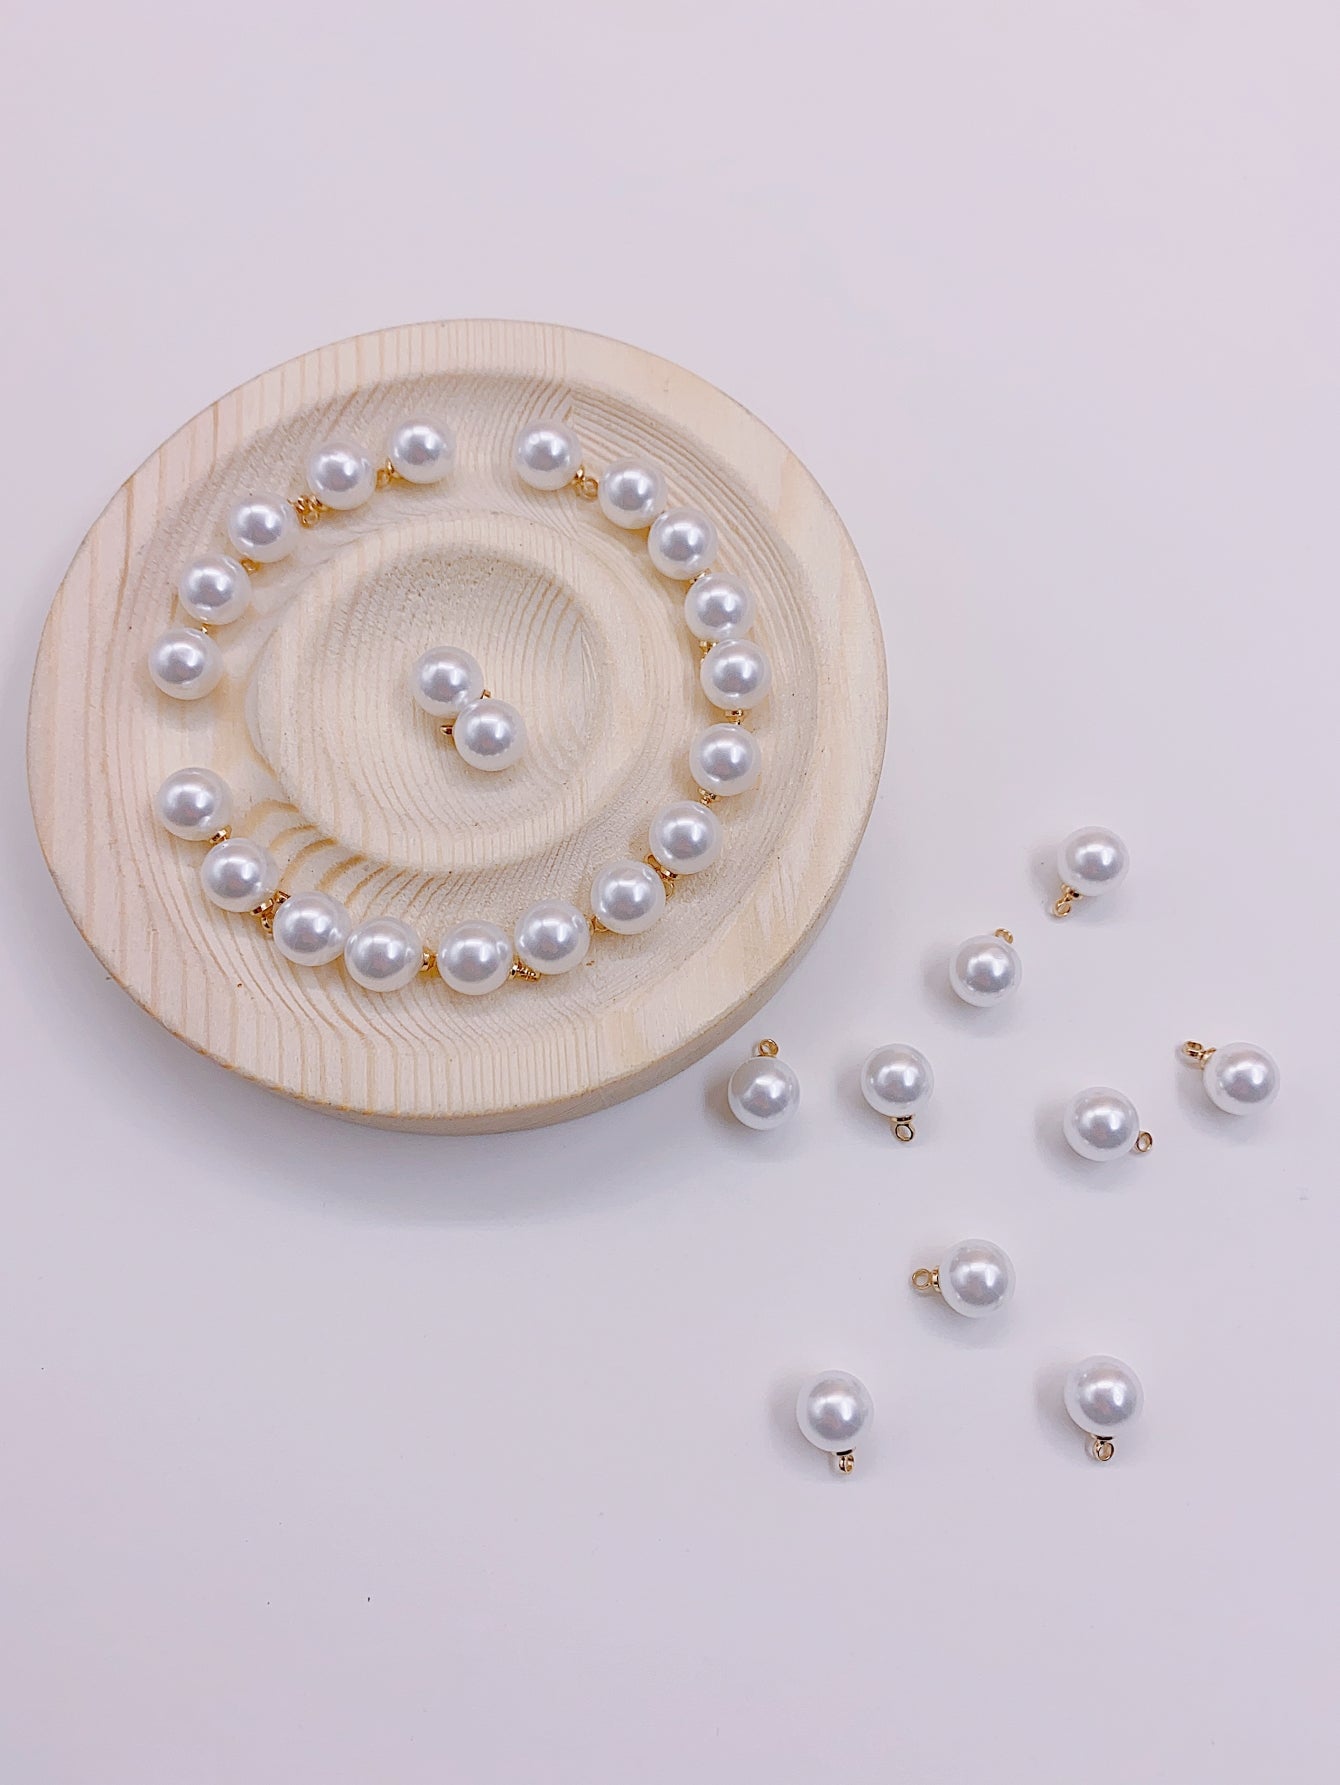 Factory spot water grinding bright ABS imitation pearl pendant necklace pendant diy accessories accessories clothing accessories